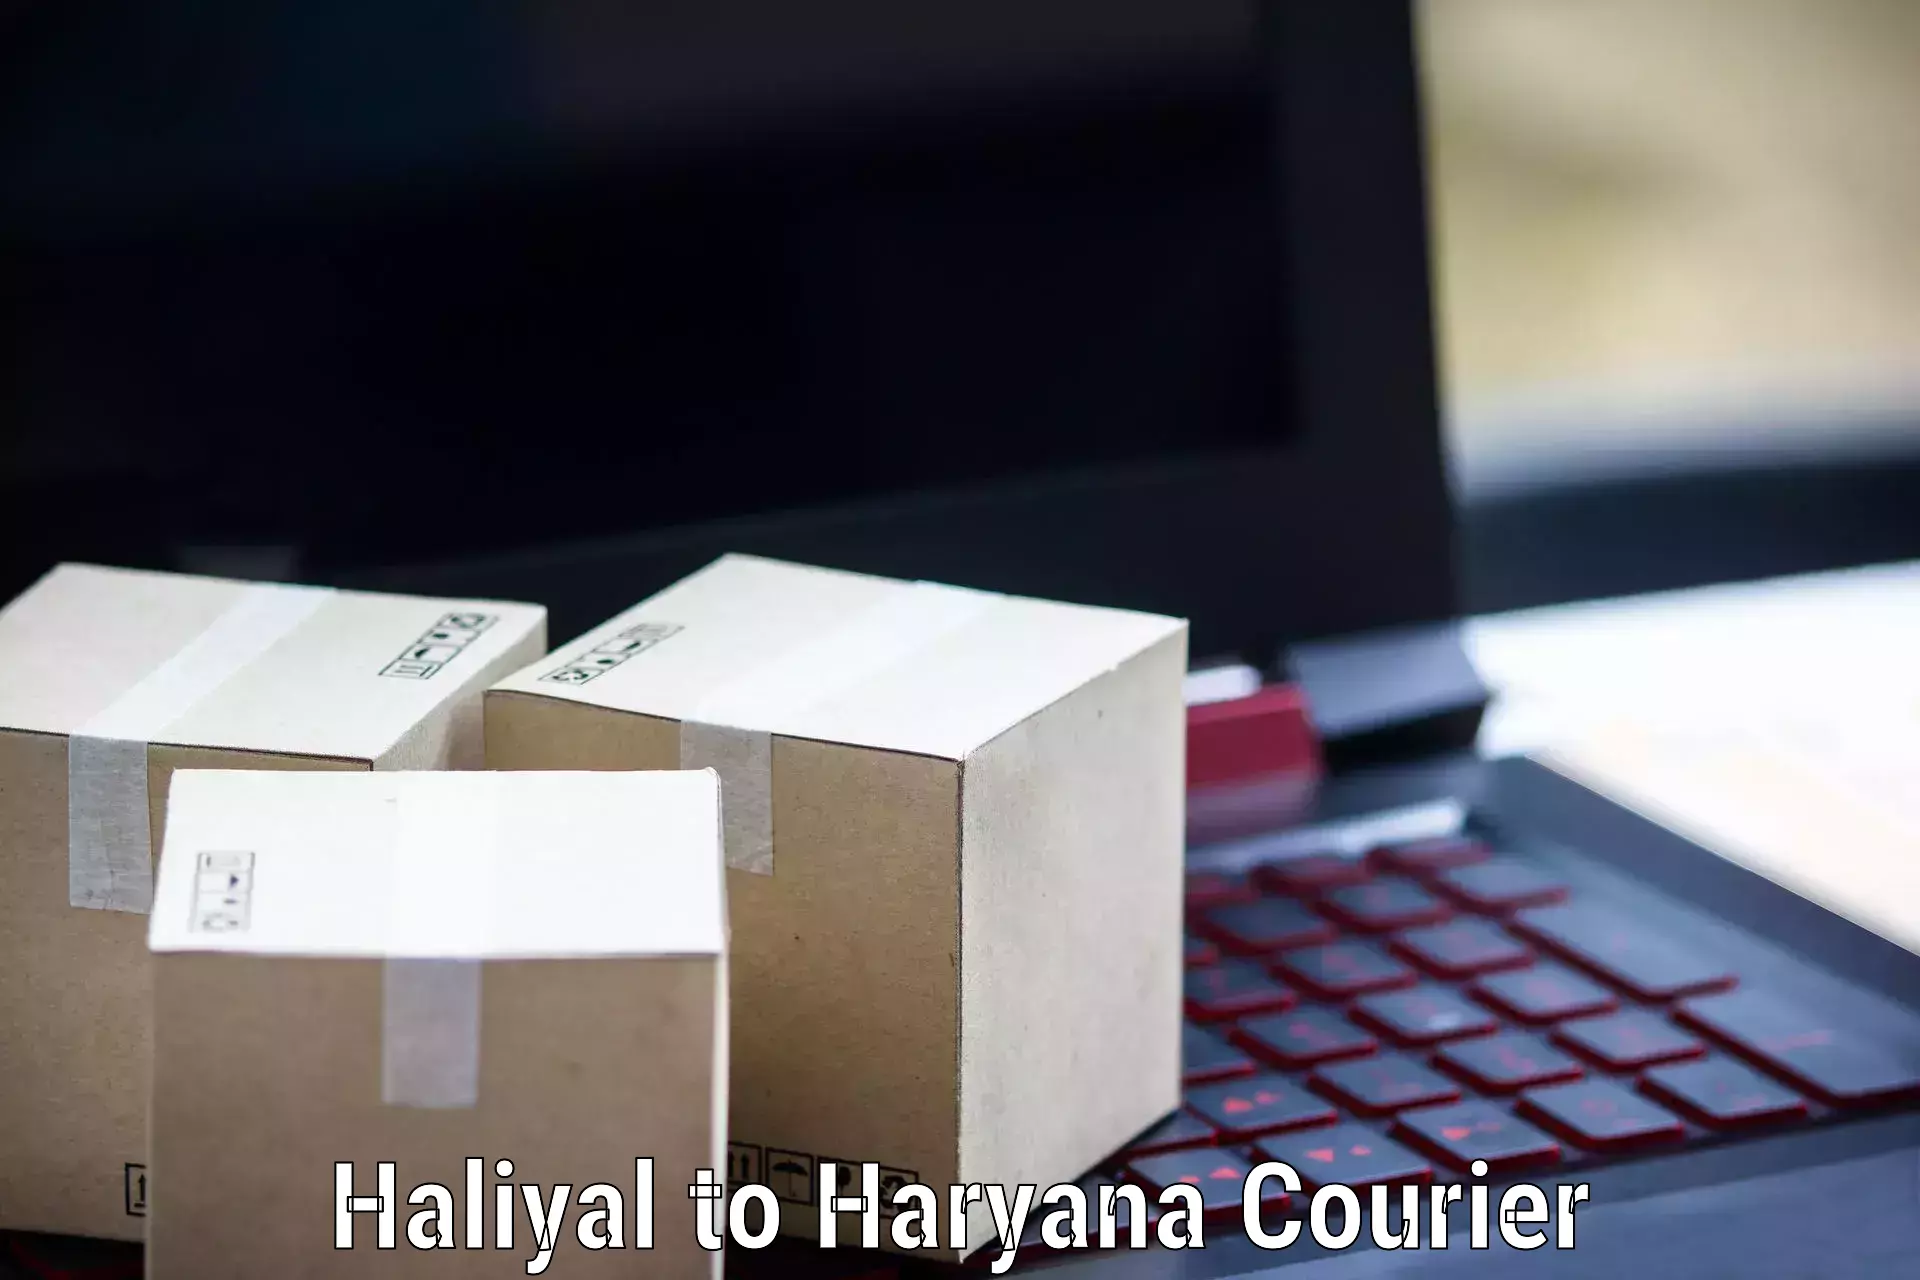 Courier service comparison Haliyal to Odhan